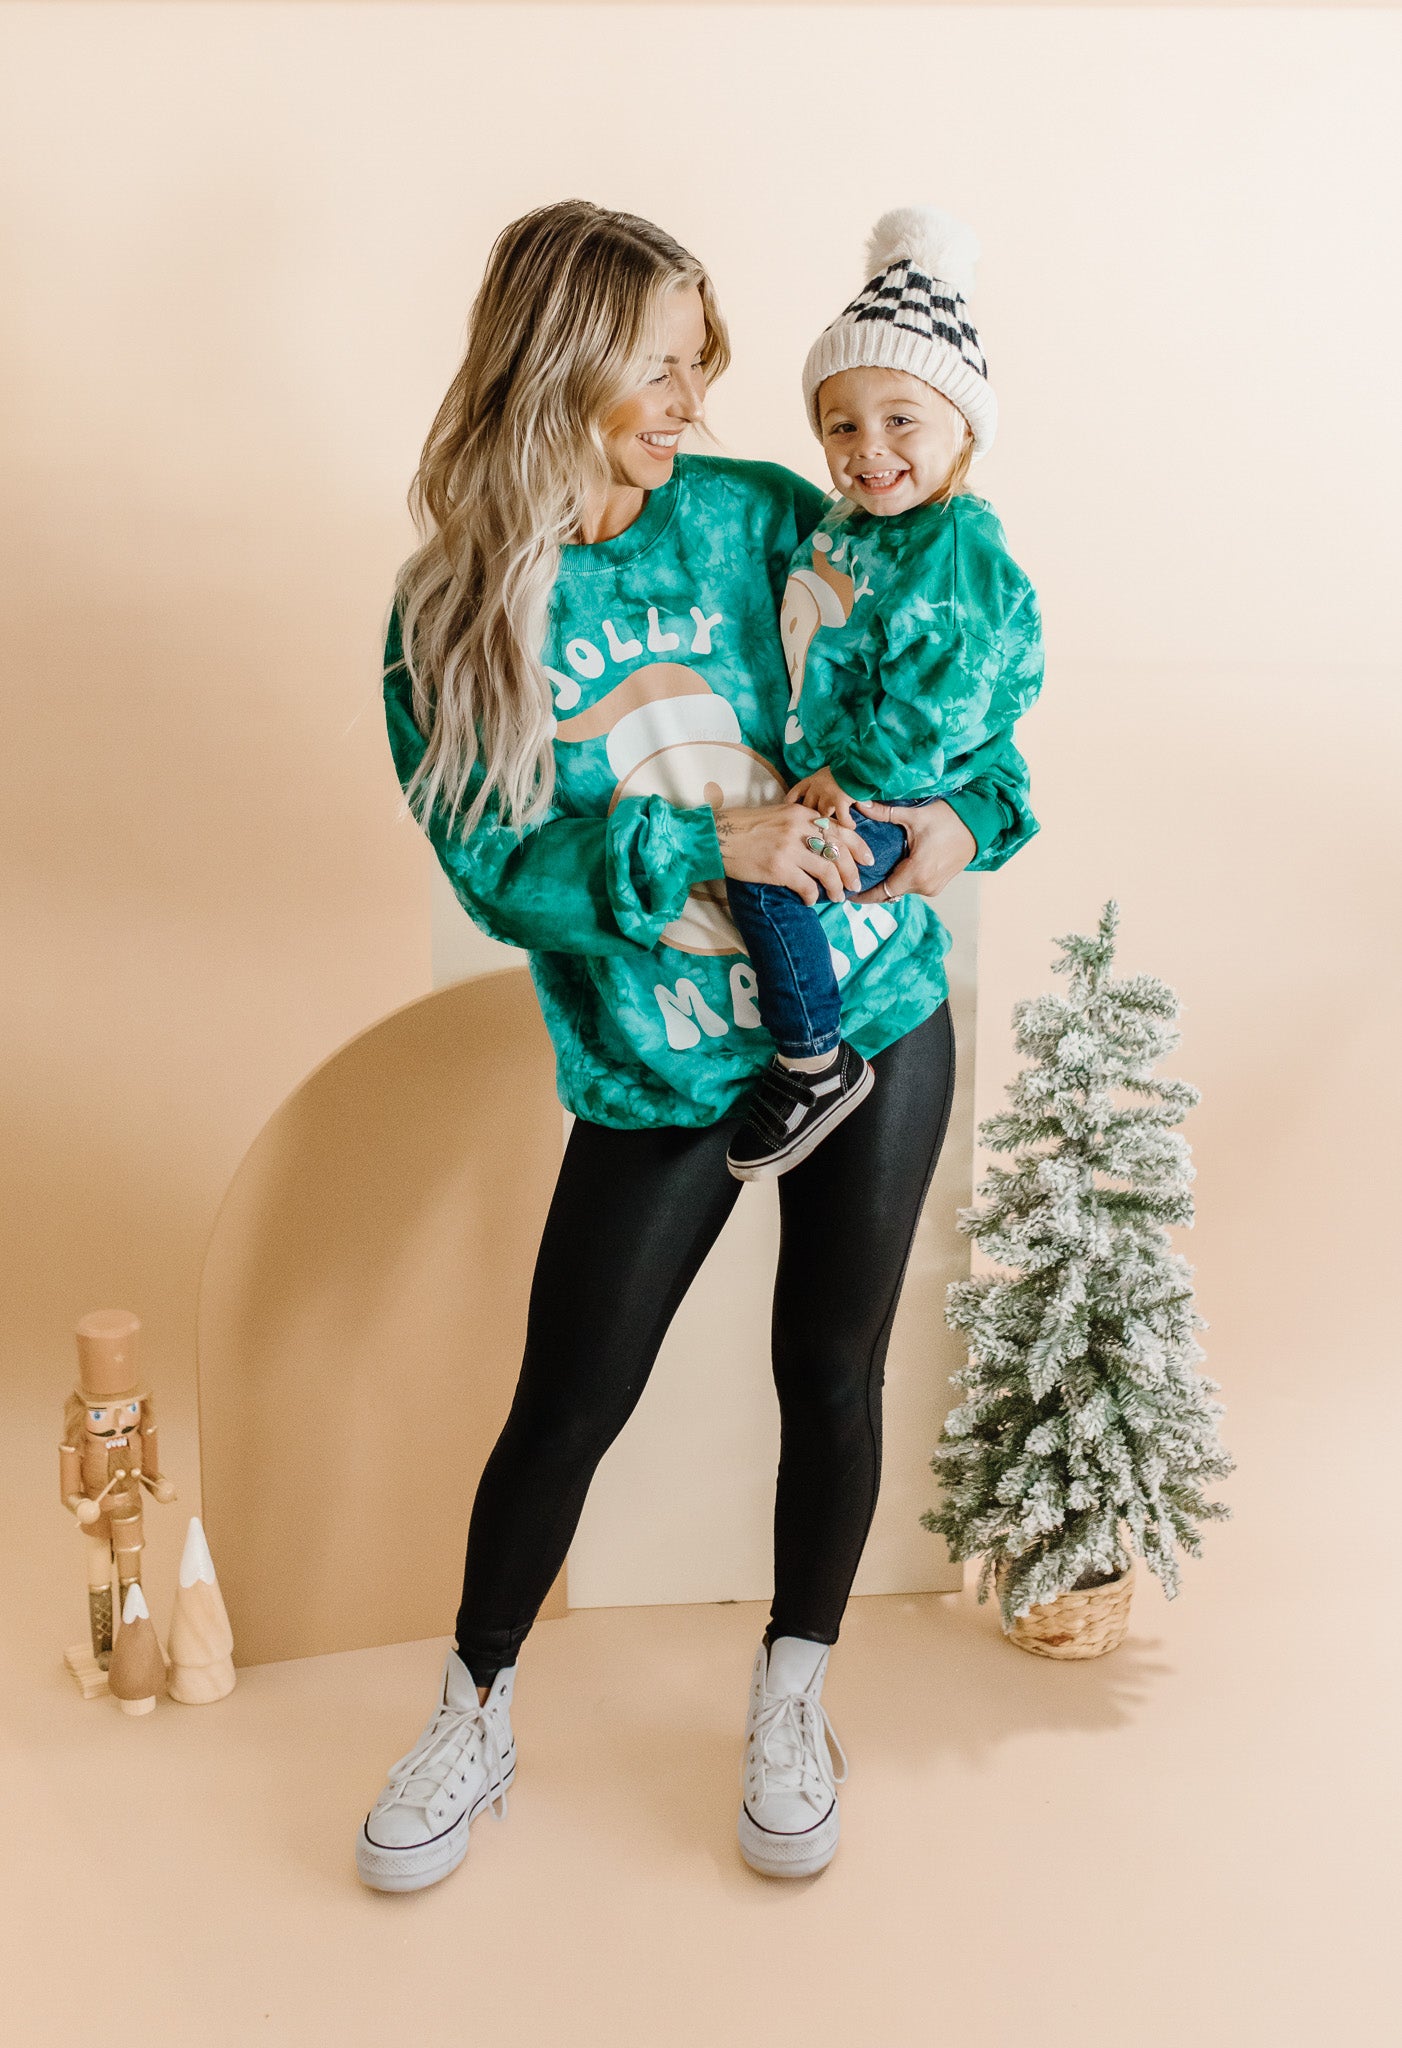 Jolly Mama ☺ Holiday Tie-Dye Pullover